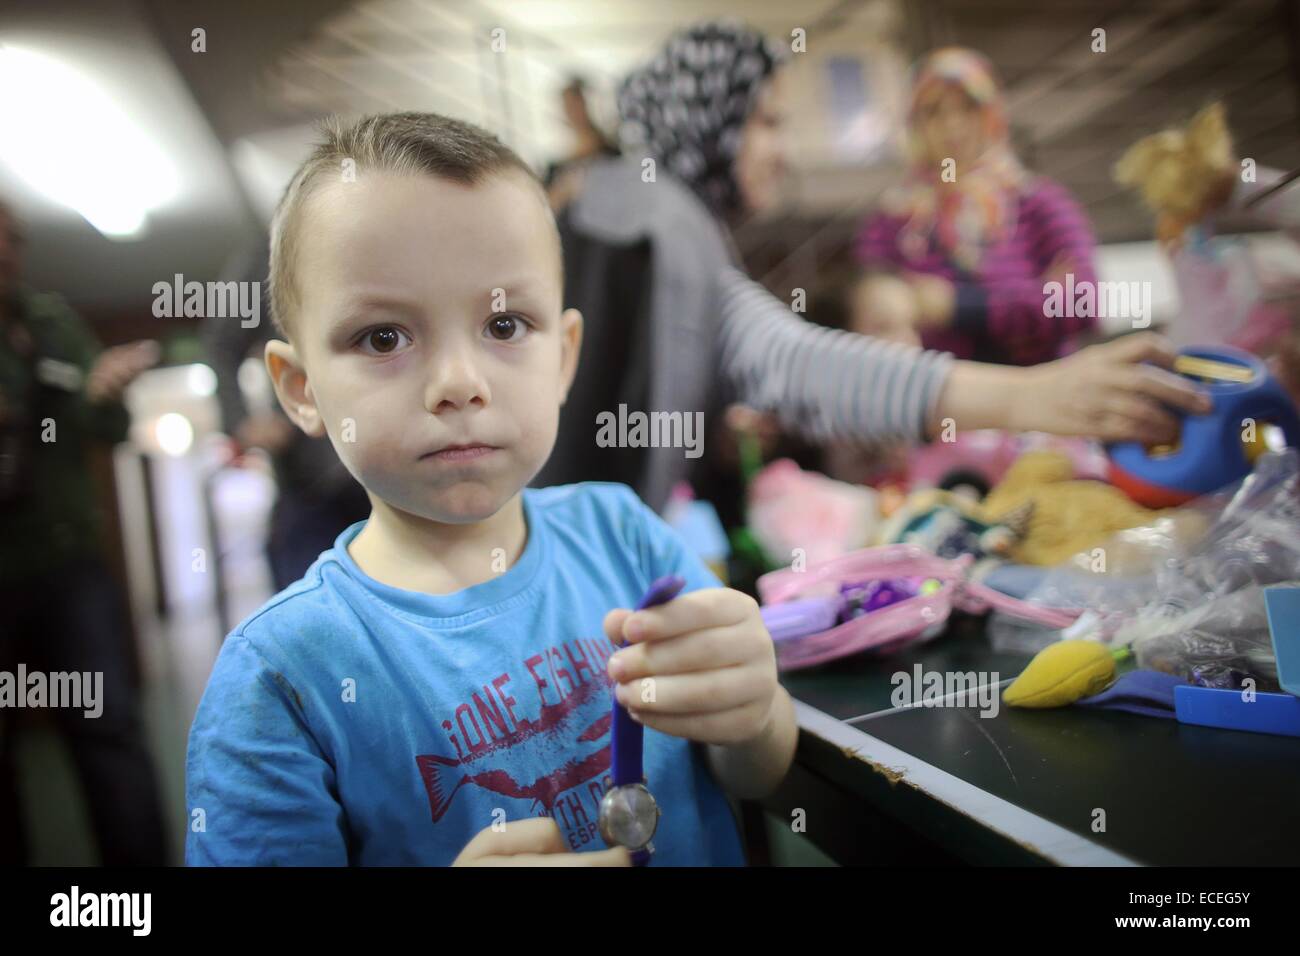 Mainz, Germany. 12th Dec, 2014. Ahmet (son of Russian refugees) plays with donated toys in the Alte Feuerwache in Mainz, Germany, 12 December 2014. Employees of the Rhineland-Palatinate State Office for Criminal Investigations donated to the refugees. Photo: FREDRIK VON ERICHSEN/dpa/Alamy Live News Stock Photo